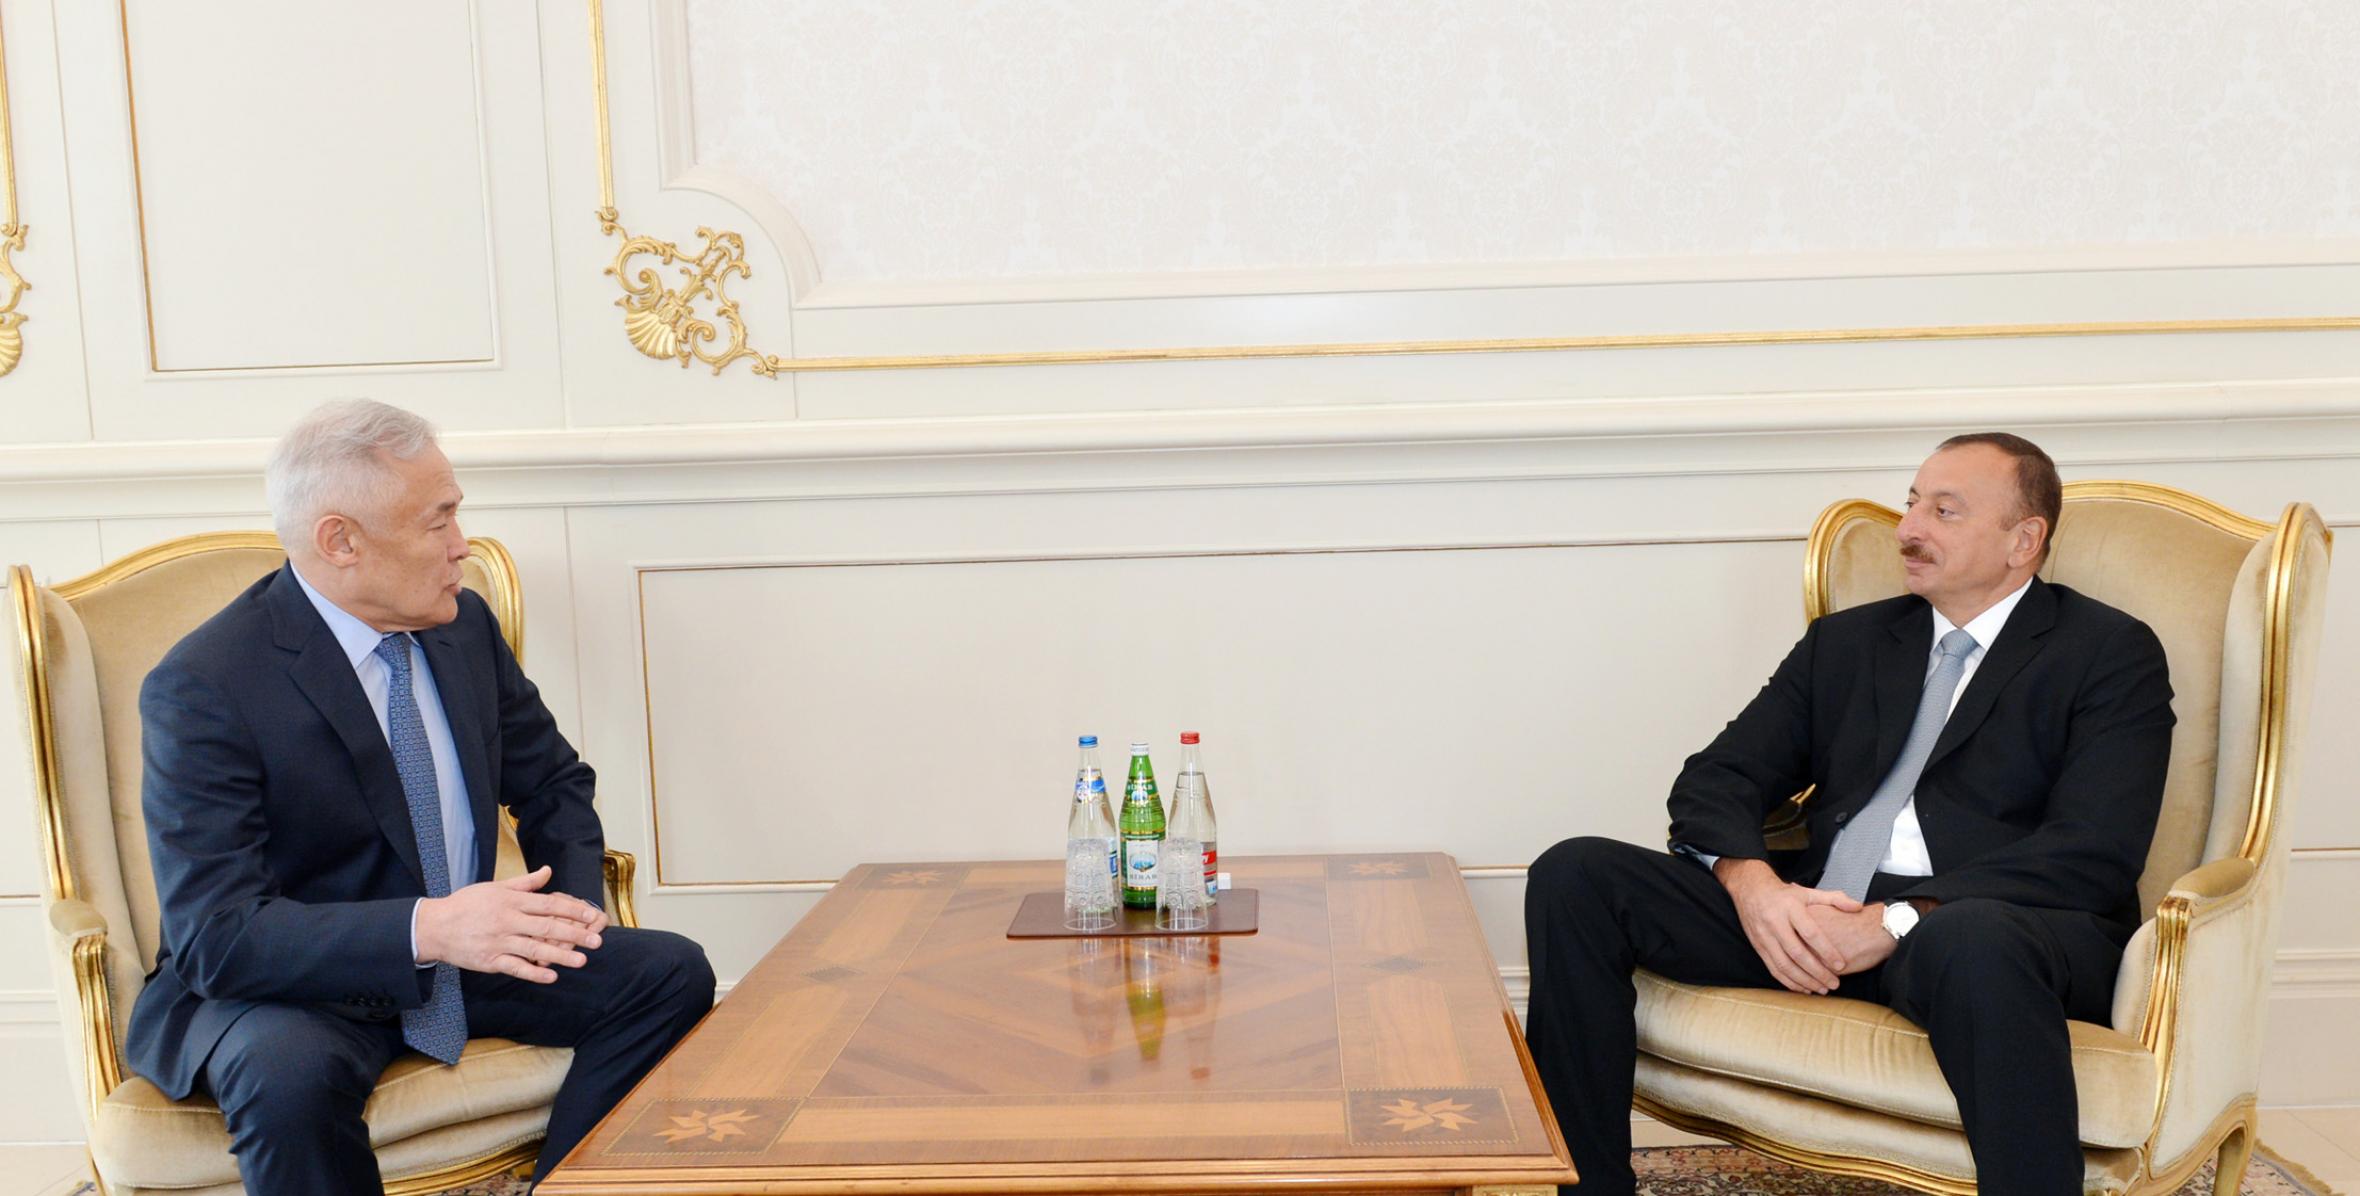 Ilham Aliyev accepted the credentials of the newly-appointed Ambassador of Kazakhstan to Azerbaijan